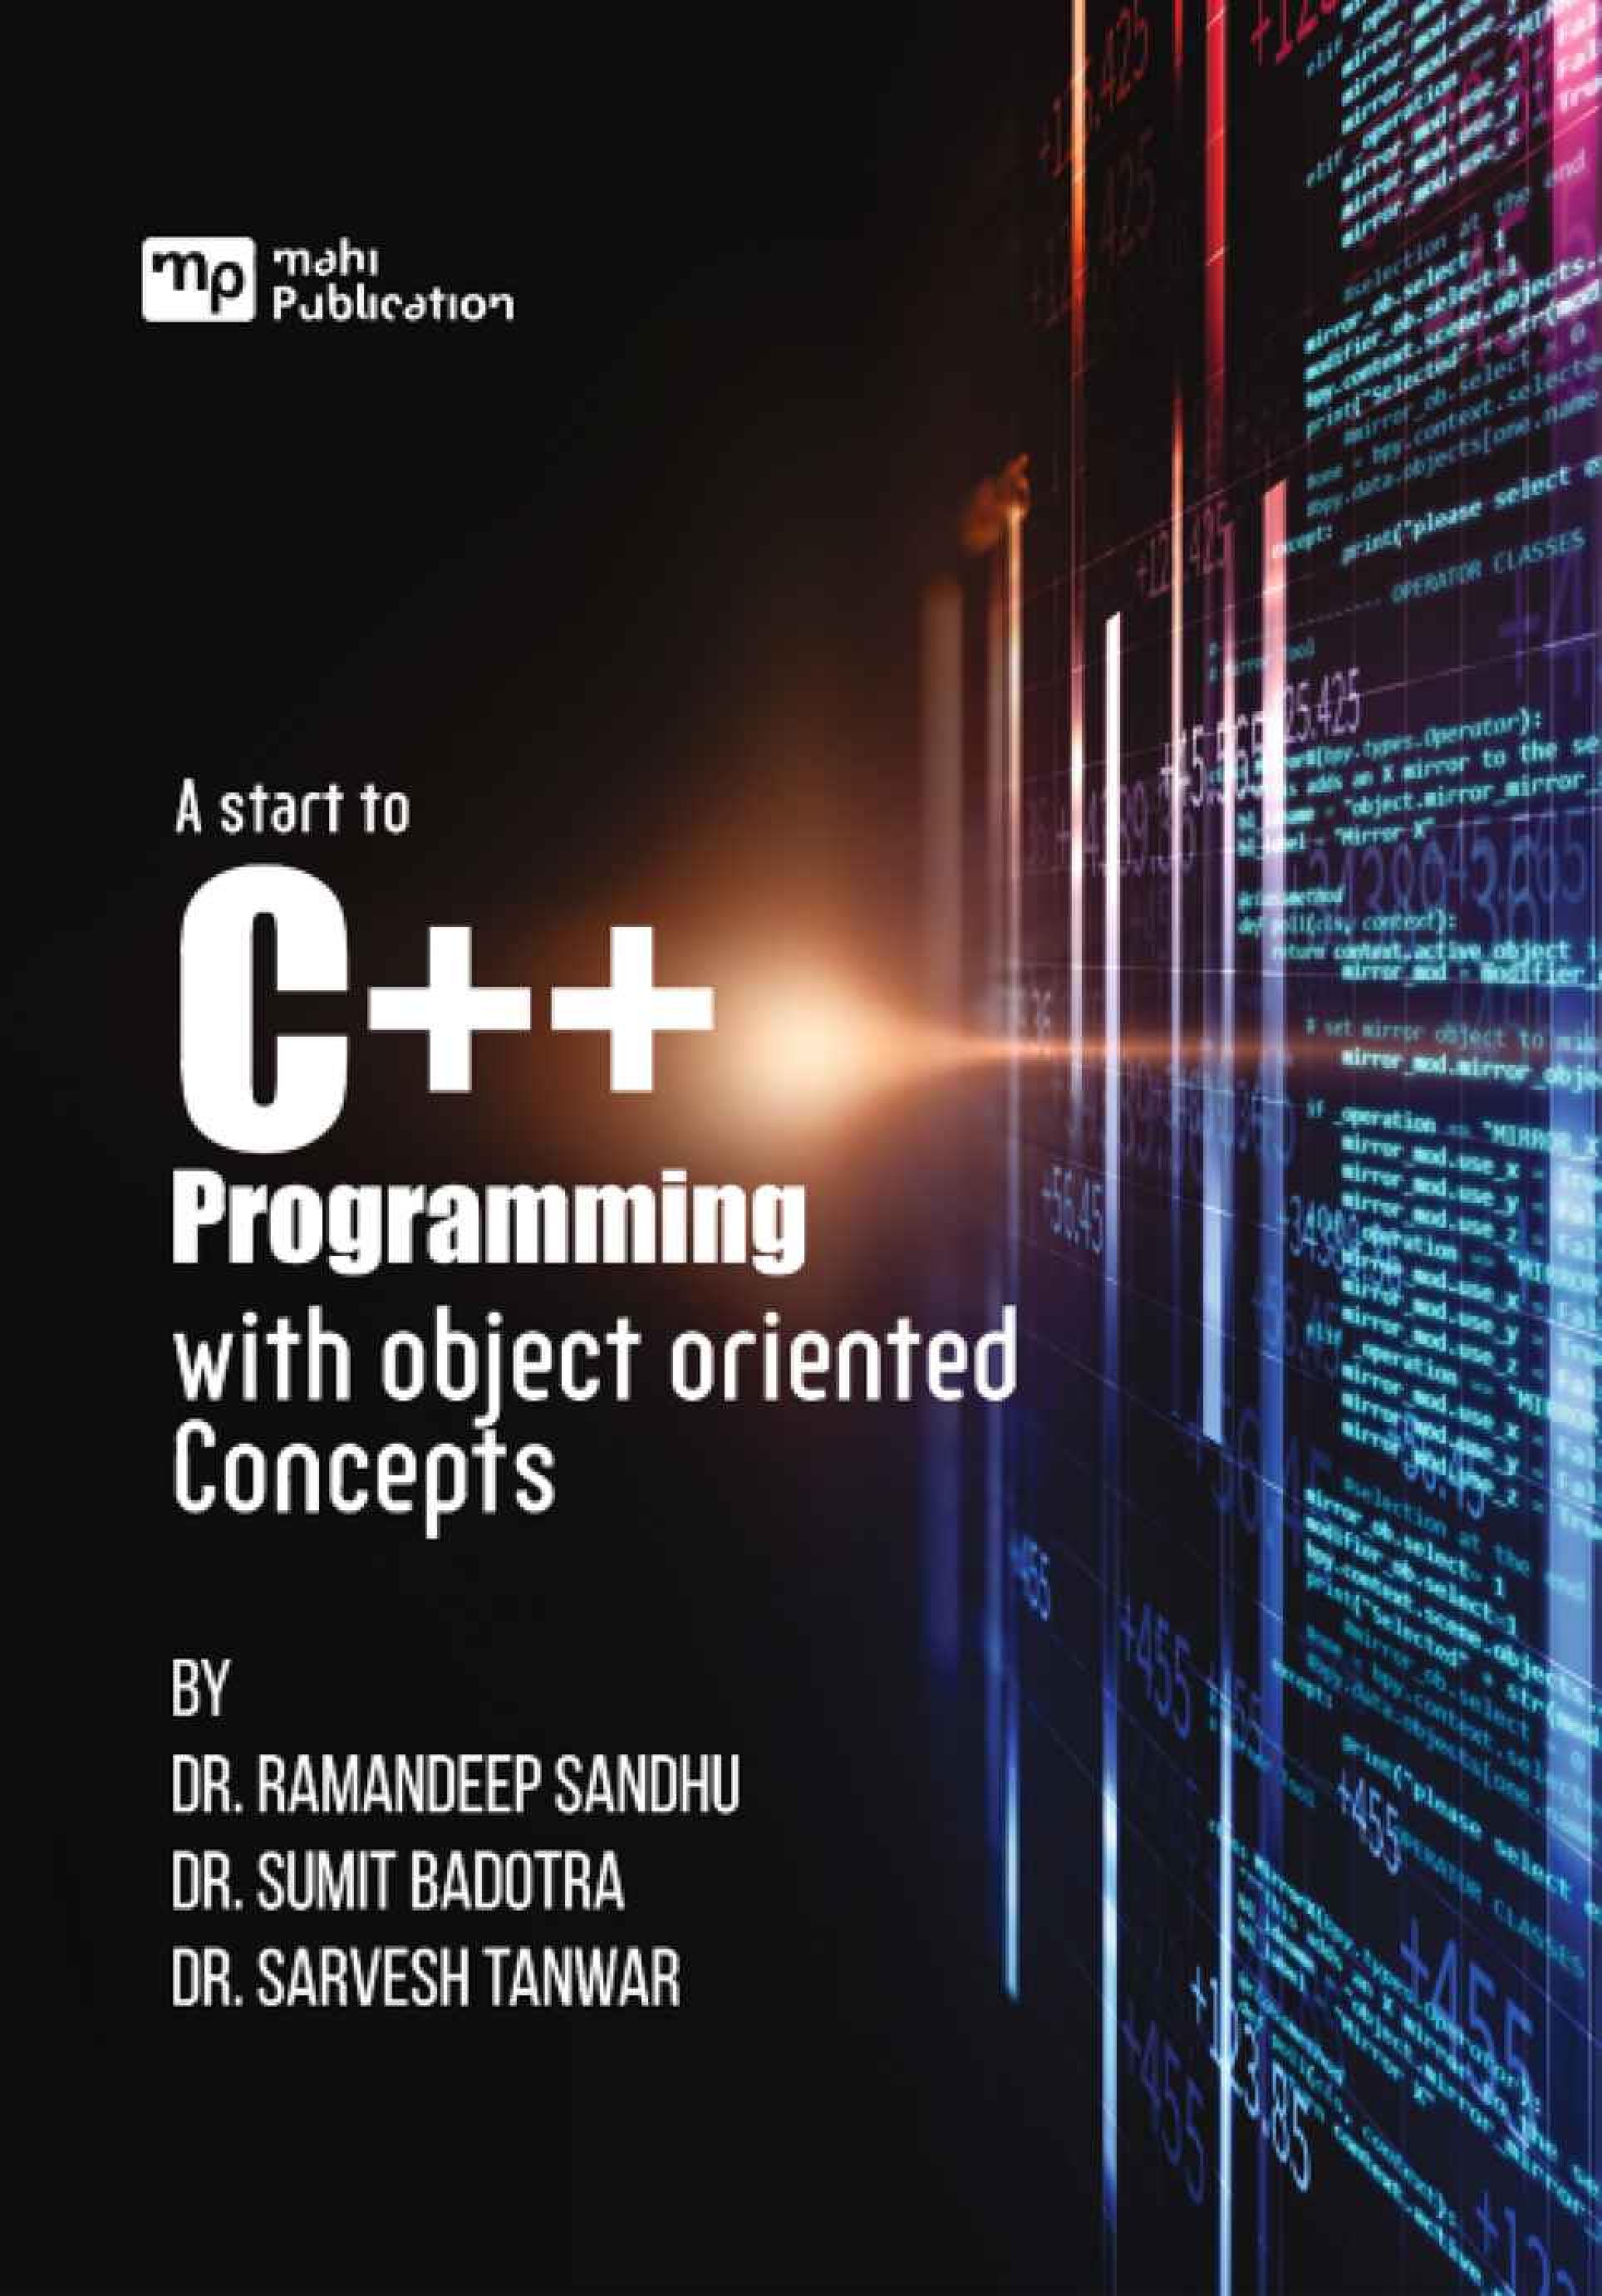 A Start To C++ Programming with object oriented Concepts